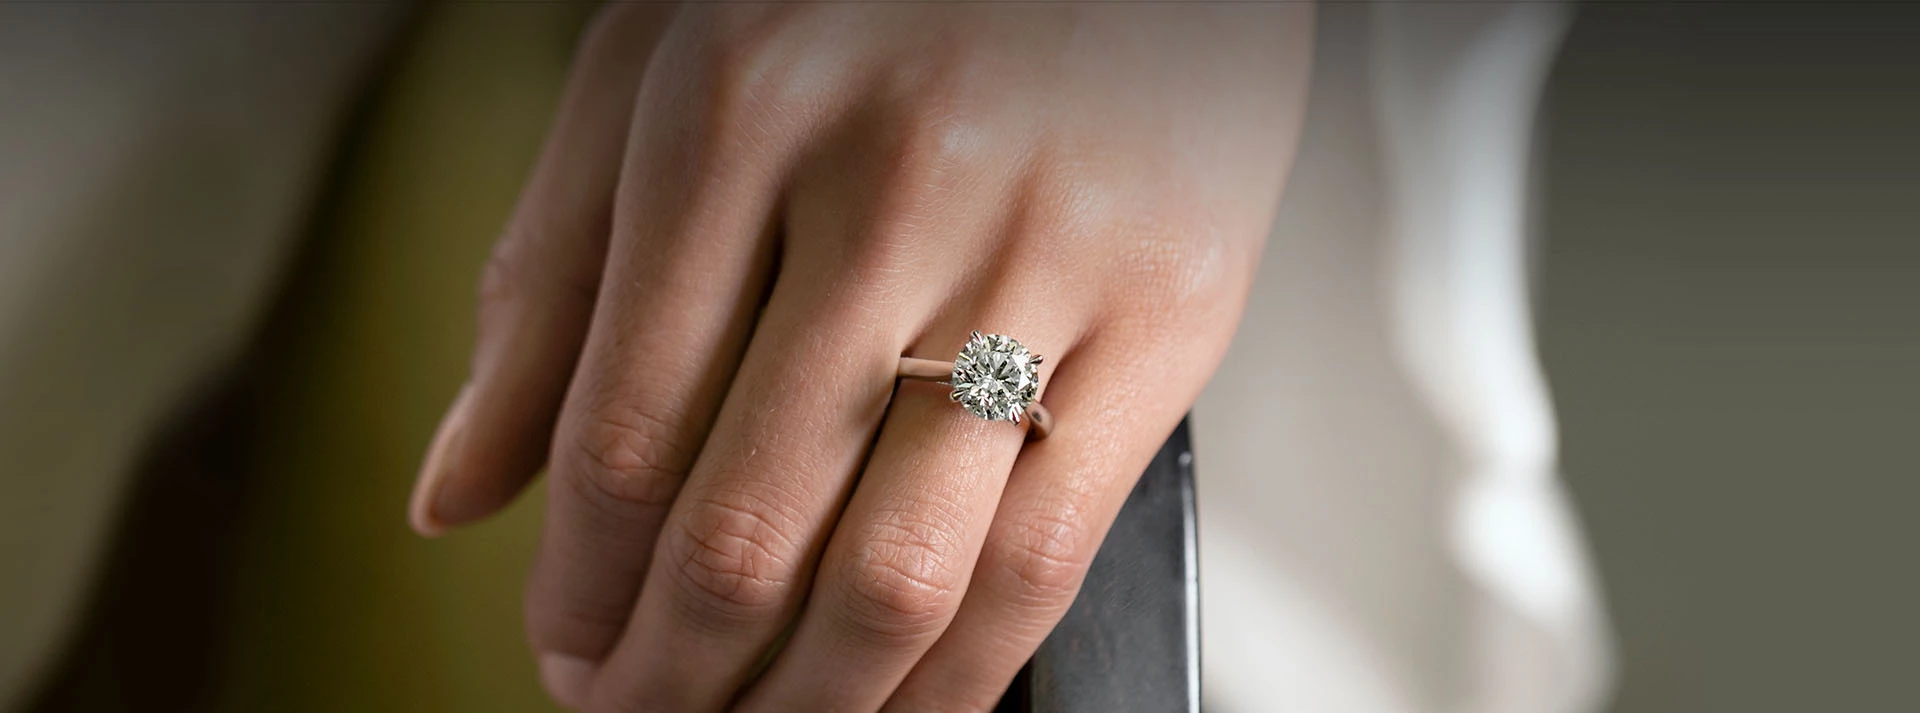 Solitaire Diamond Engagement Rings - 0% Finance